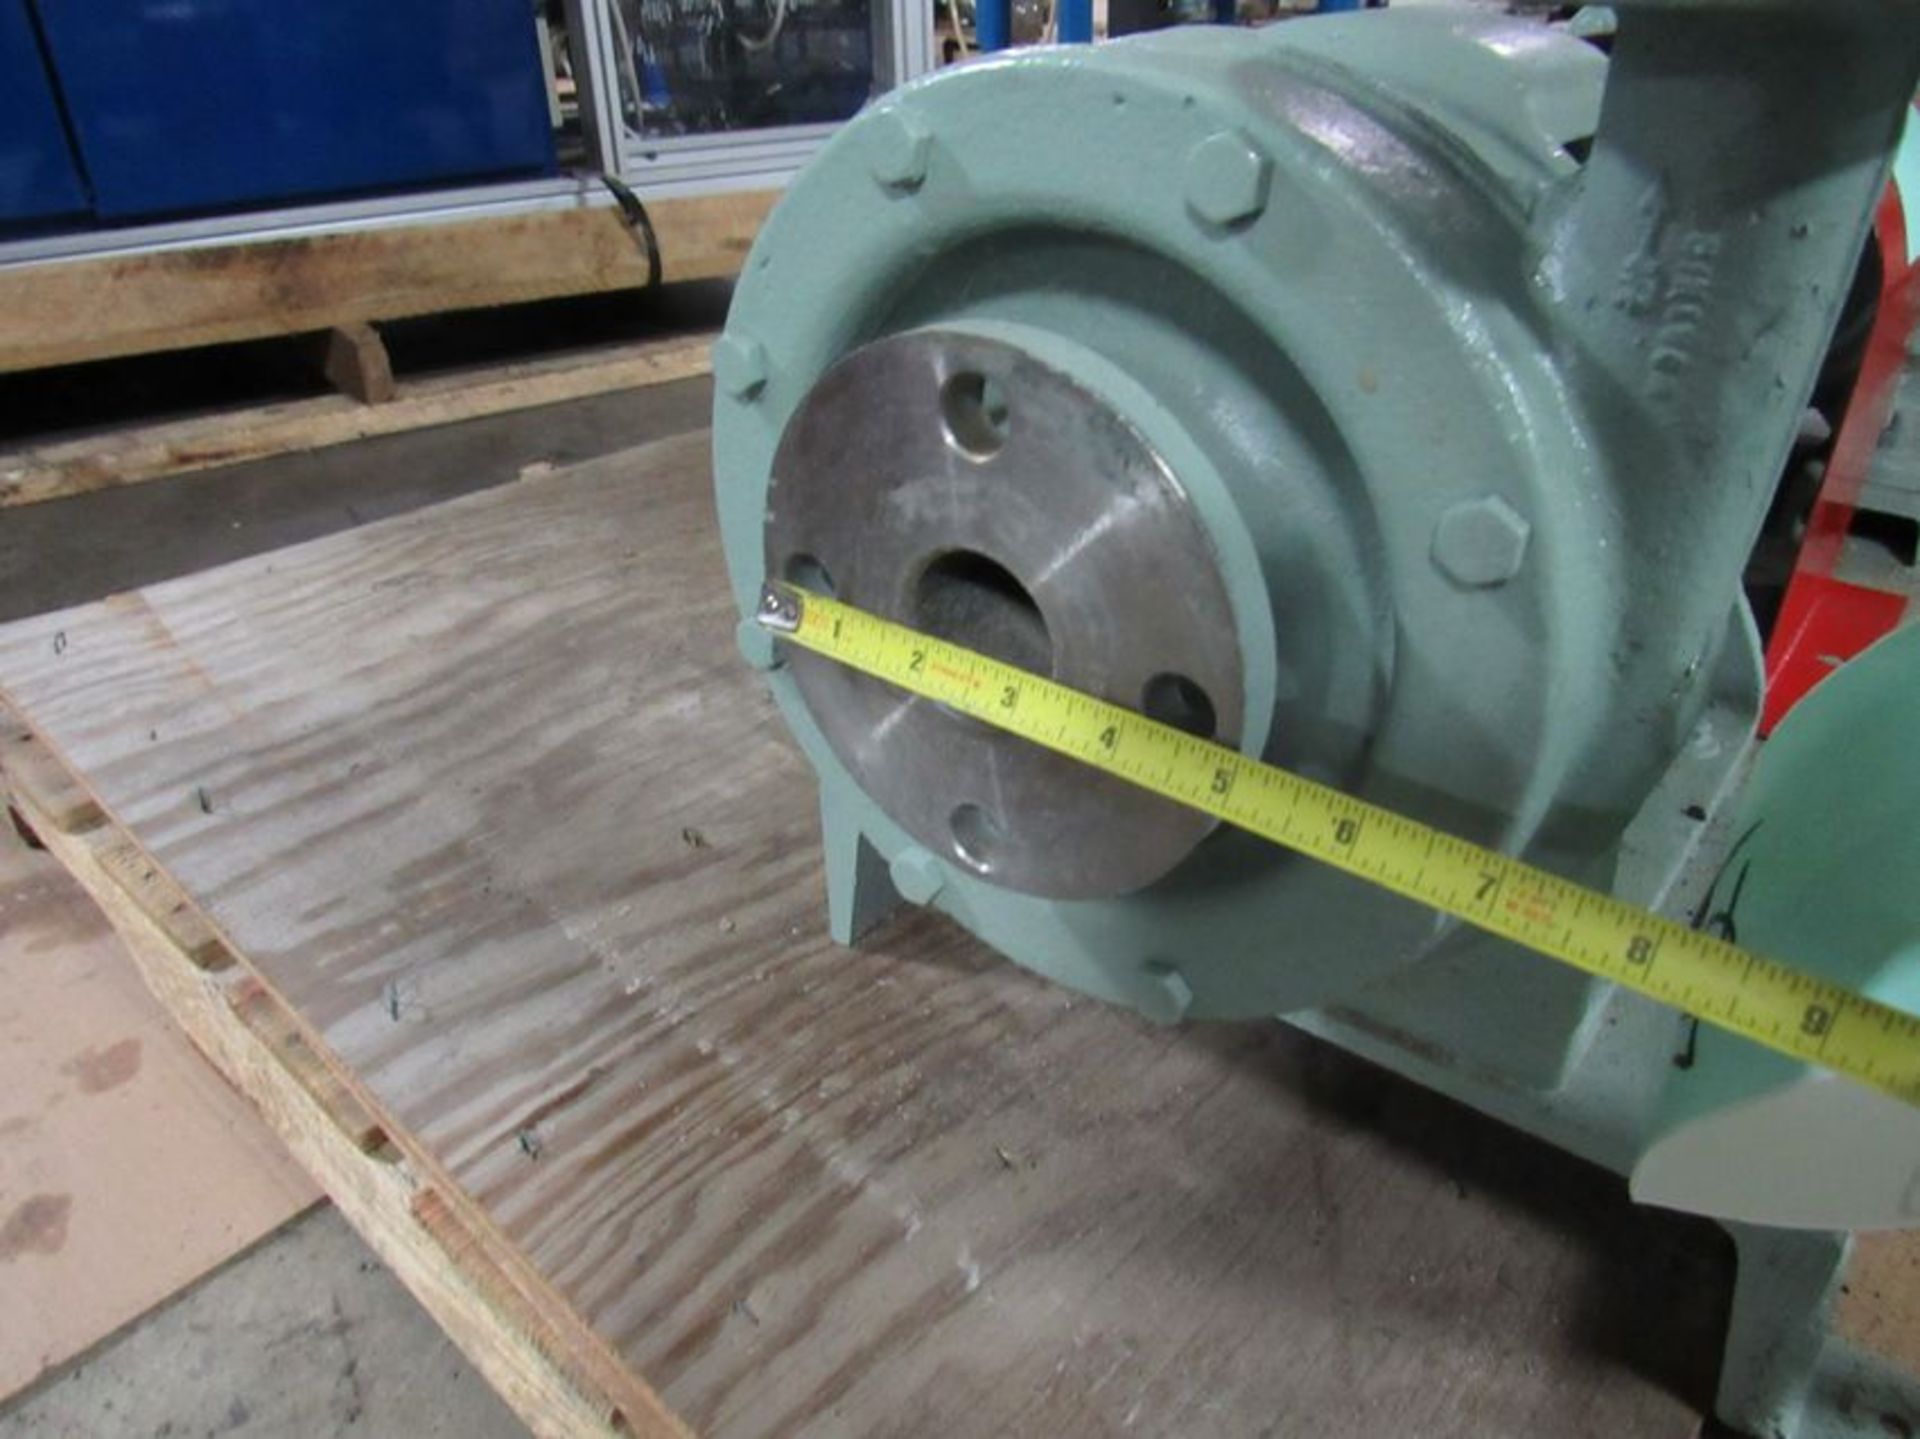 Worthington Centrifugal Pump Model D512, 1.5" by 1.0" Inlet/Outlet, Serial #Y648137P- Impeller - Image 9 of 10